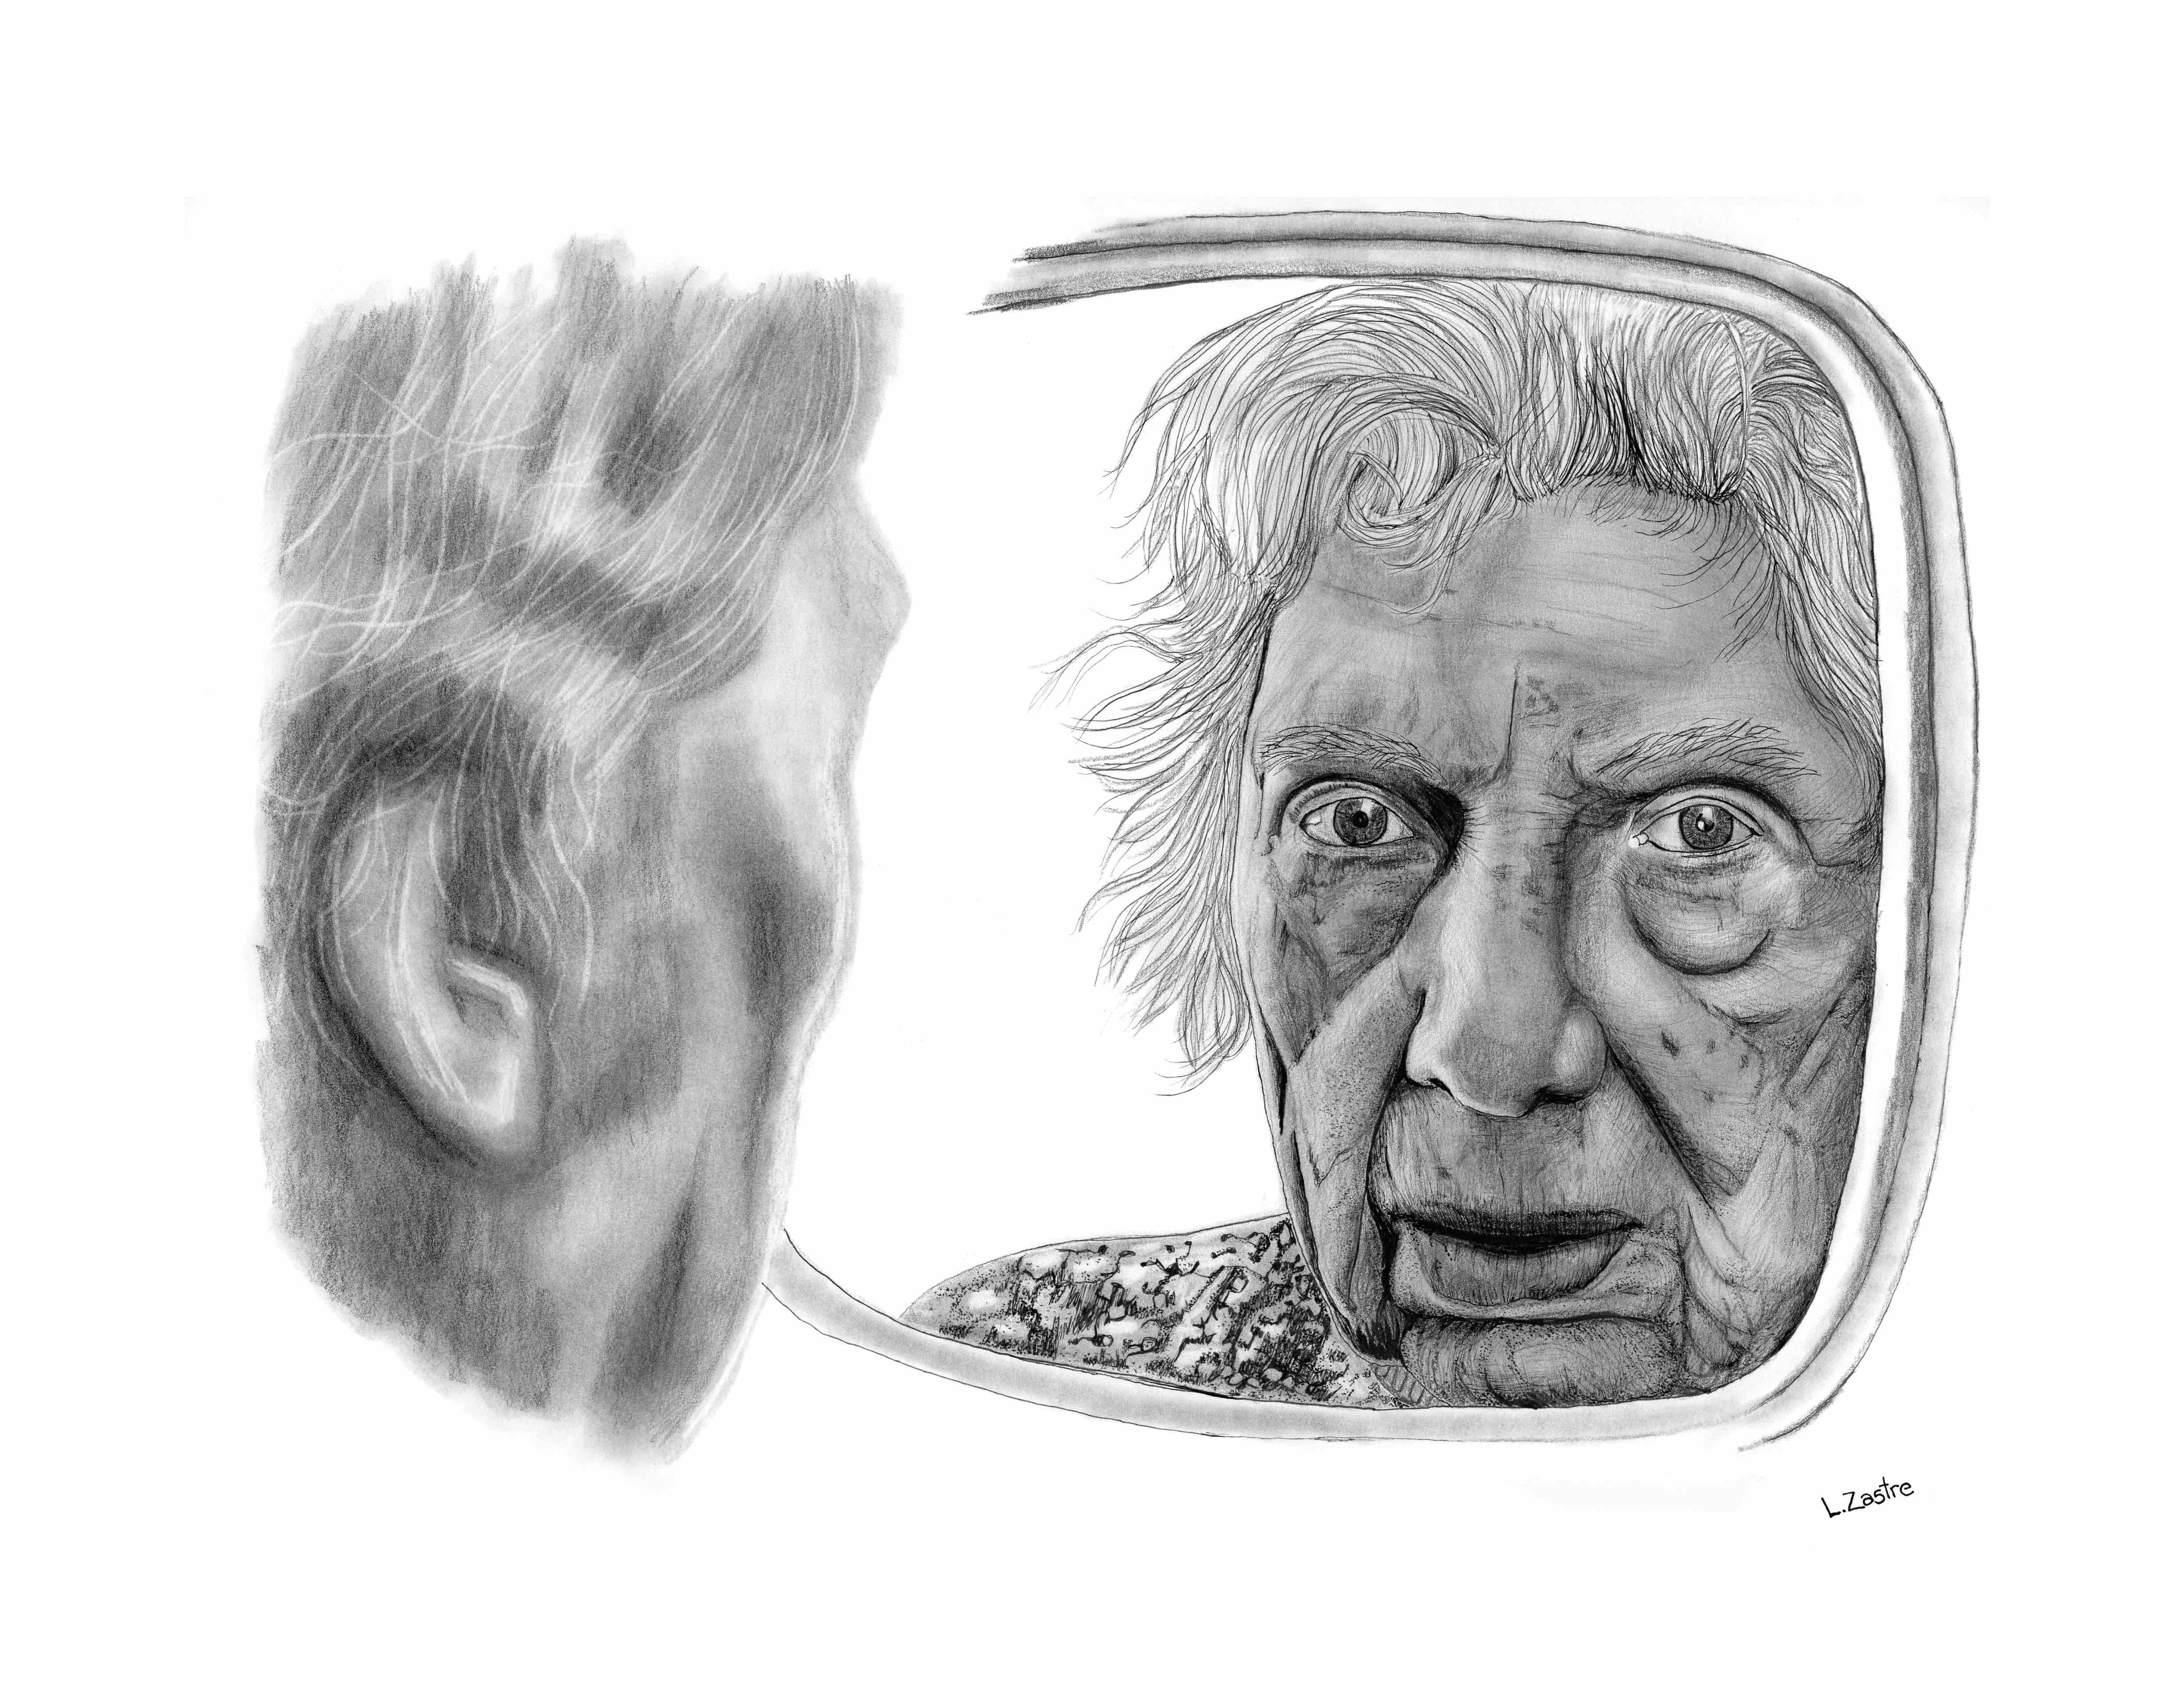 In this drawing we see an elderly woman’s face, as reflected in a mirror she is gazing into. Her eye are apprehensive, a concerned /confused look on her face.